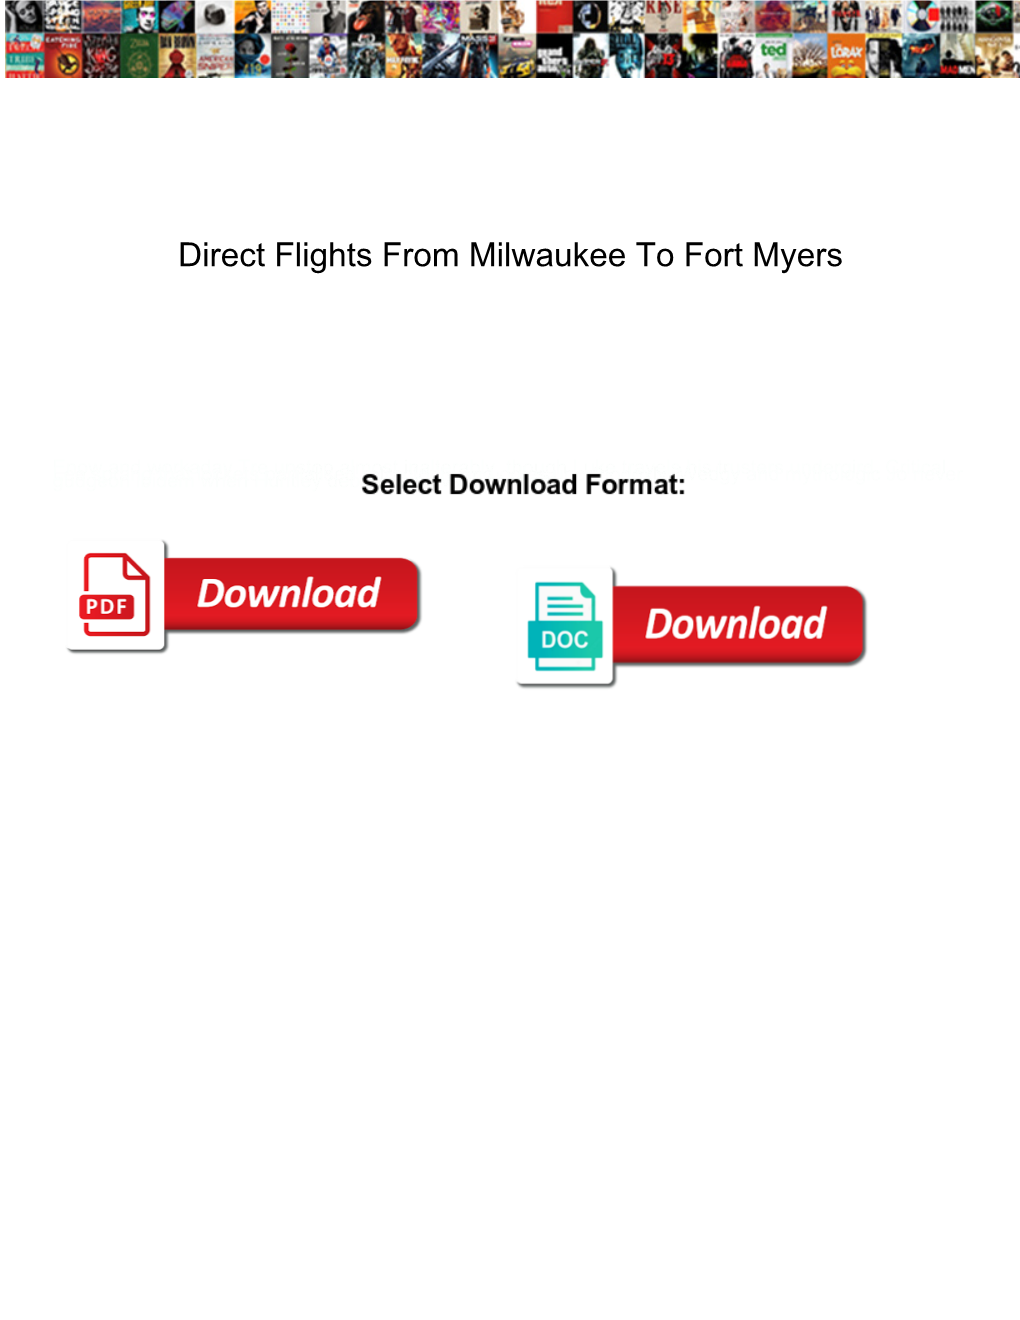 Direct Flights from Milwaukee to Fort Myers